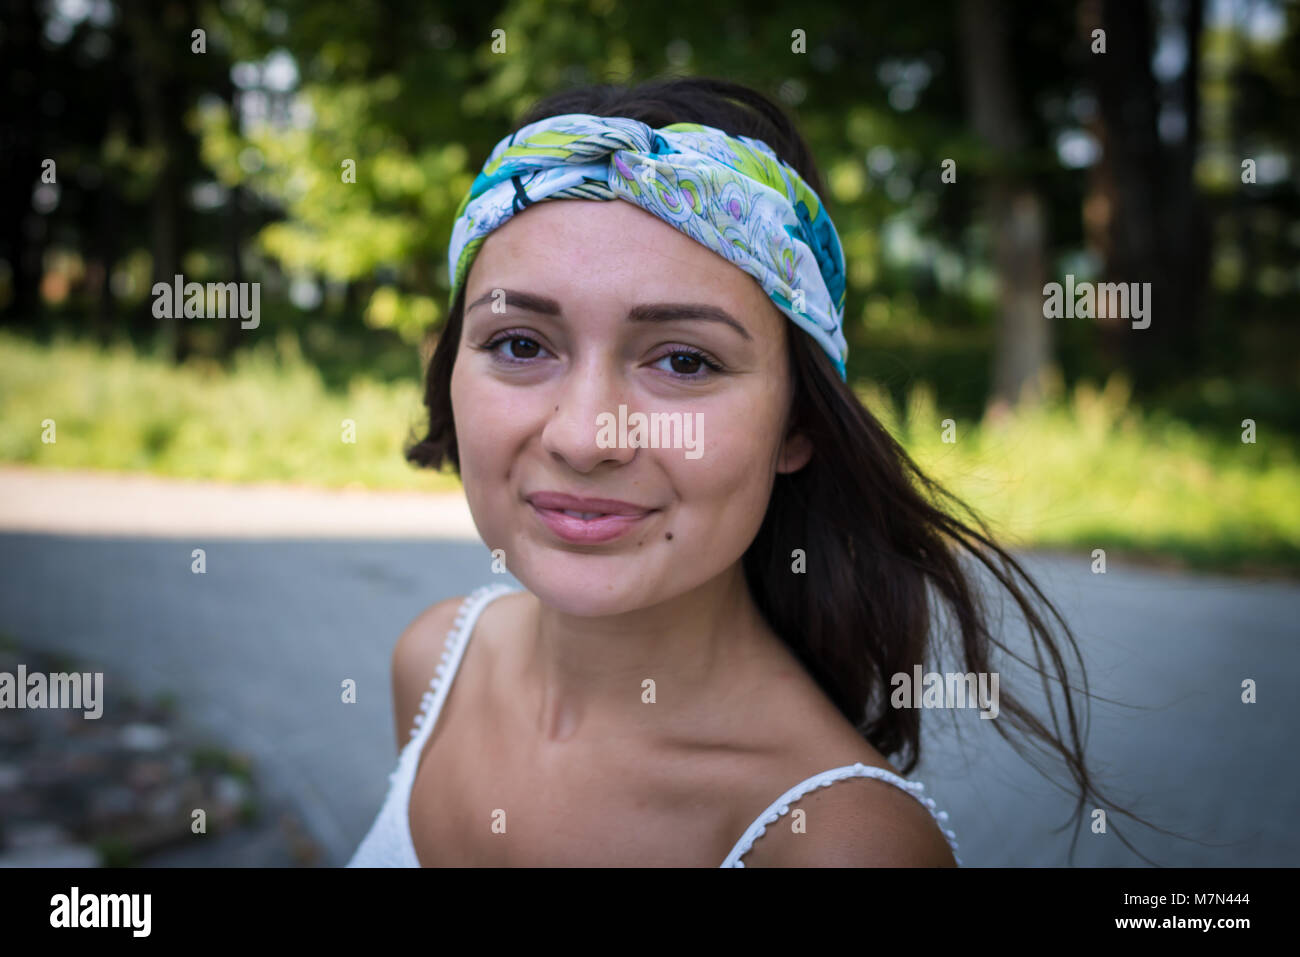 Portrait of young woman with colorful bandage on the head. Beautiful smiling girl is standing on the background of nature and trees Stock Photo